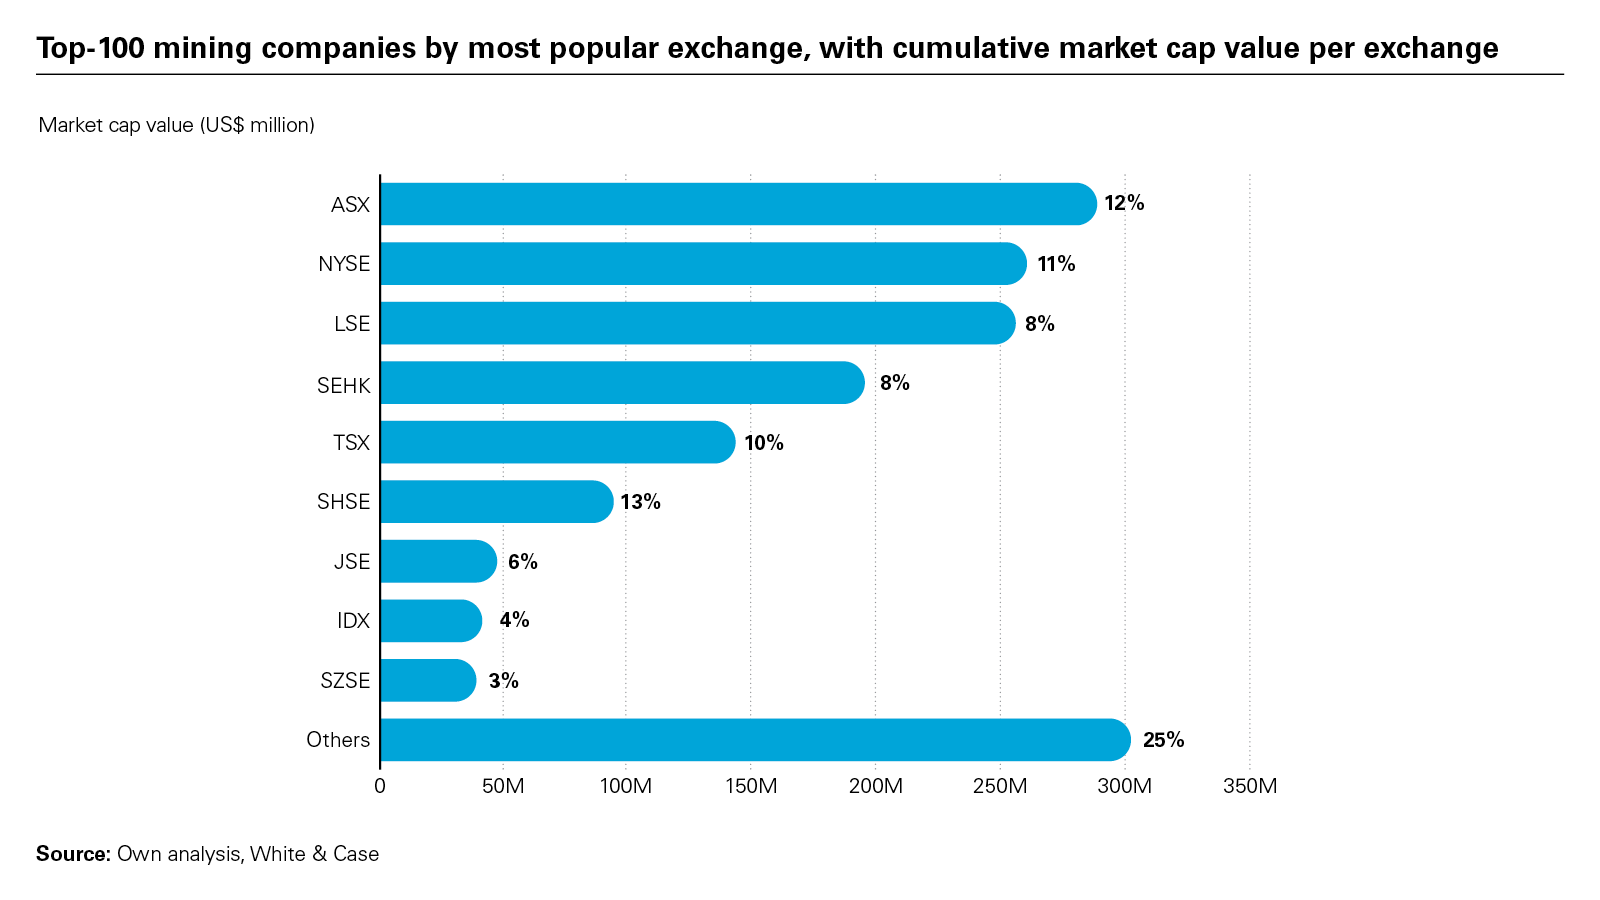 Top-100 mining companies by most popular exchange, with cumulative market cap value per exchange